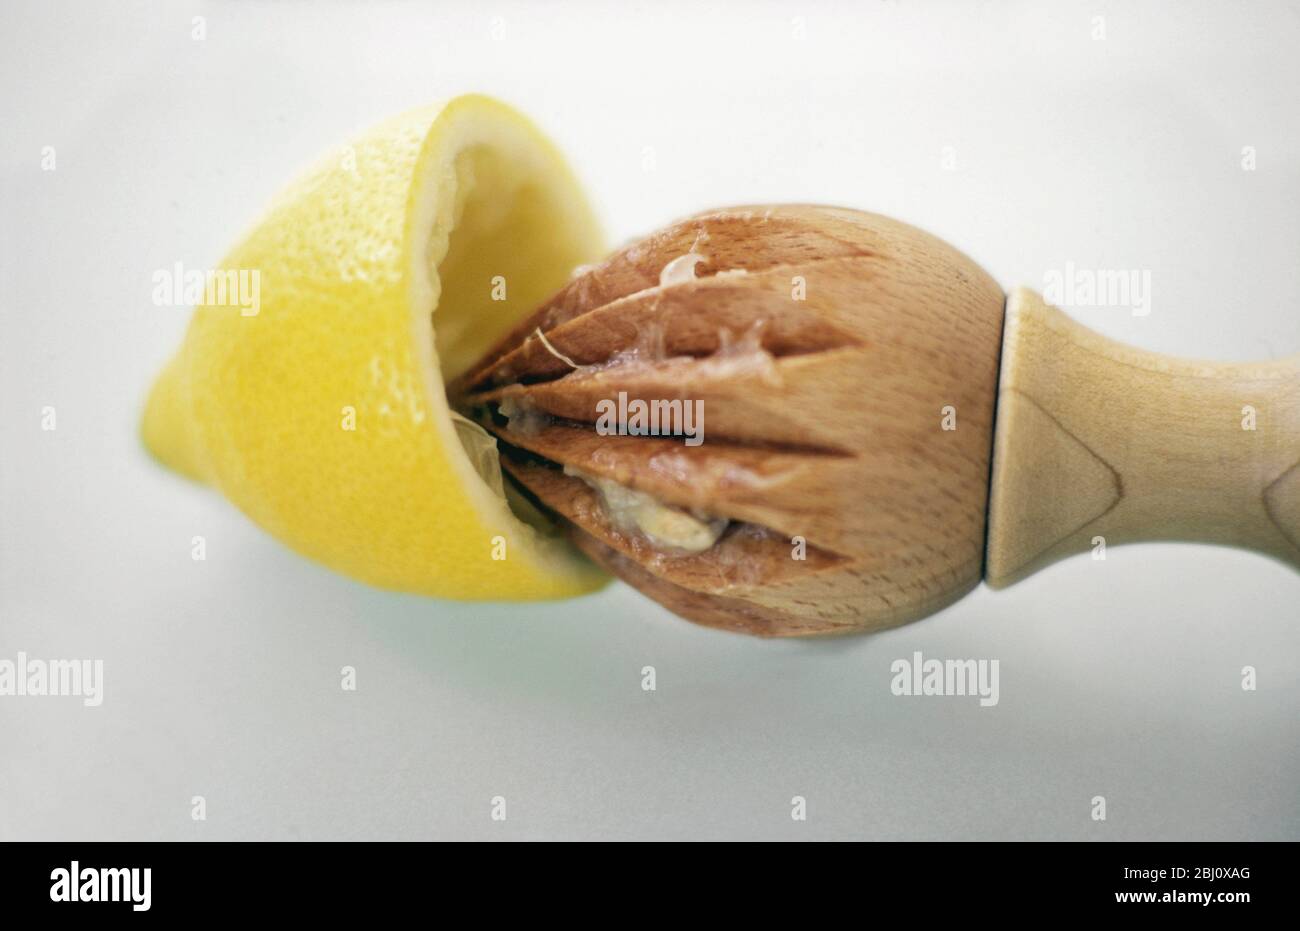 Classic wooden lemon squeezer being used to extract juice from lemon half - Stock Photo